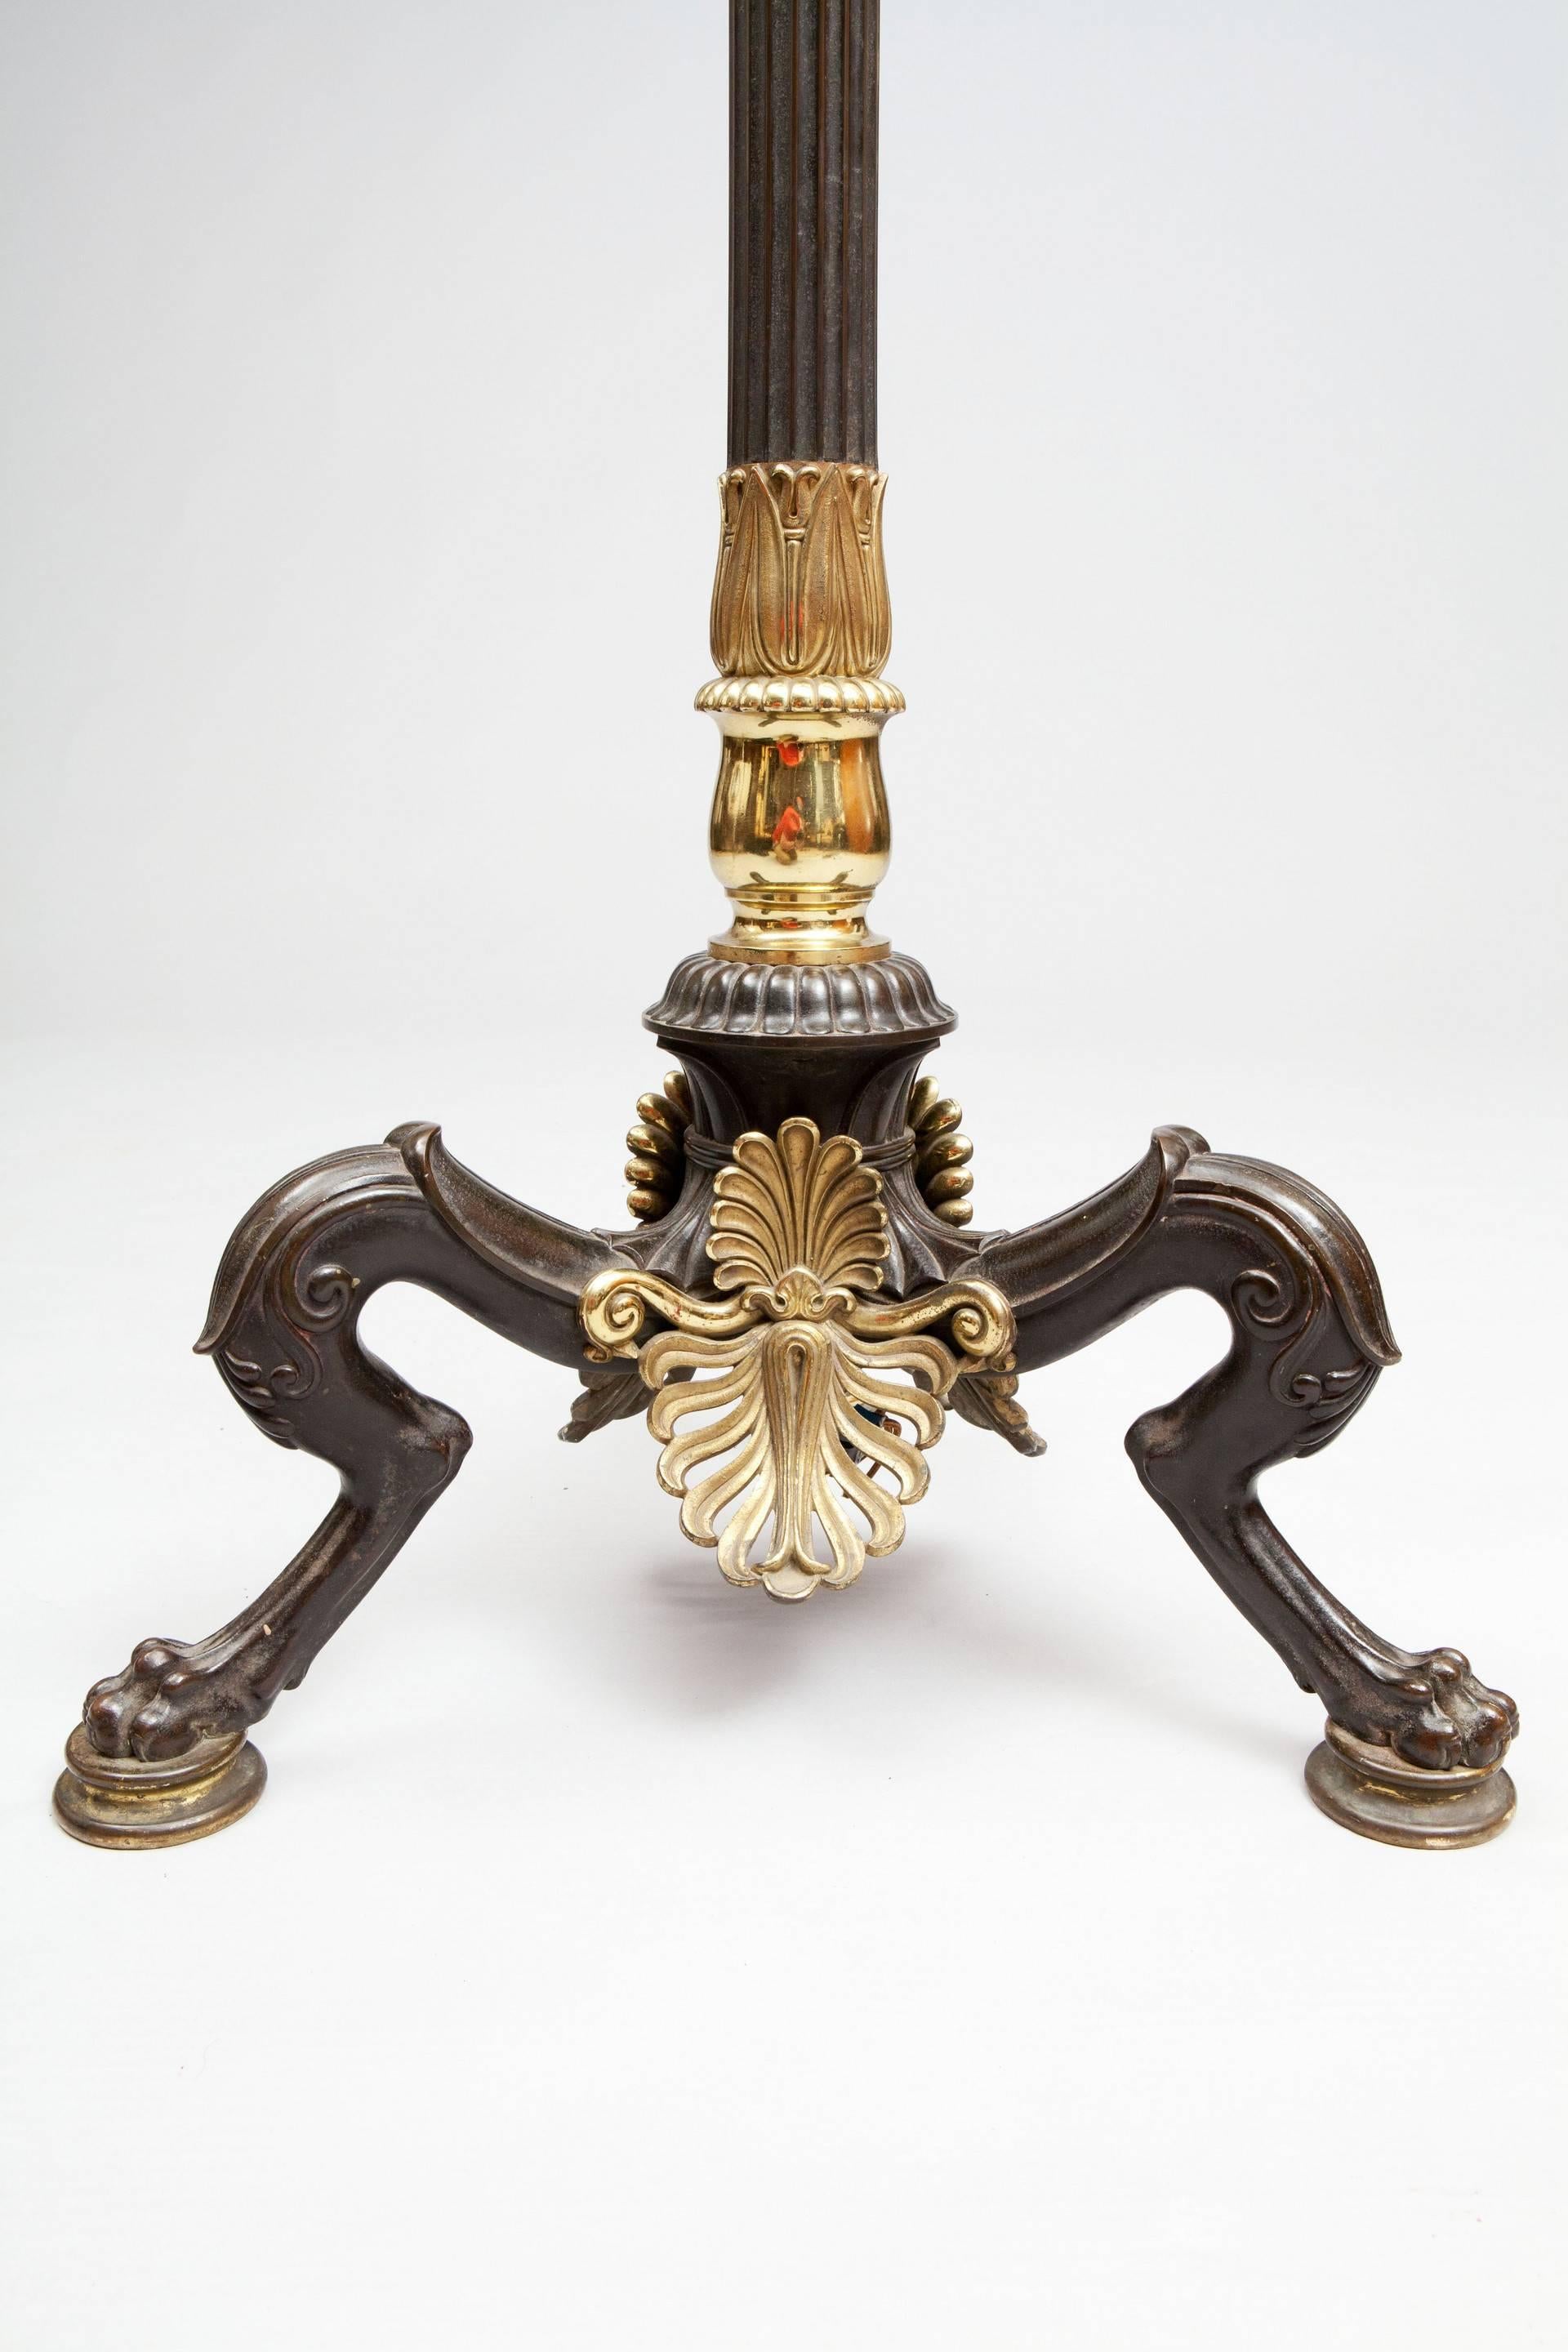 Neoclassical Neo Classical Hall Light in Bronze and Ormolu